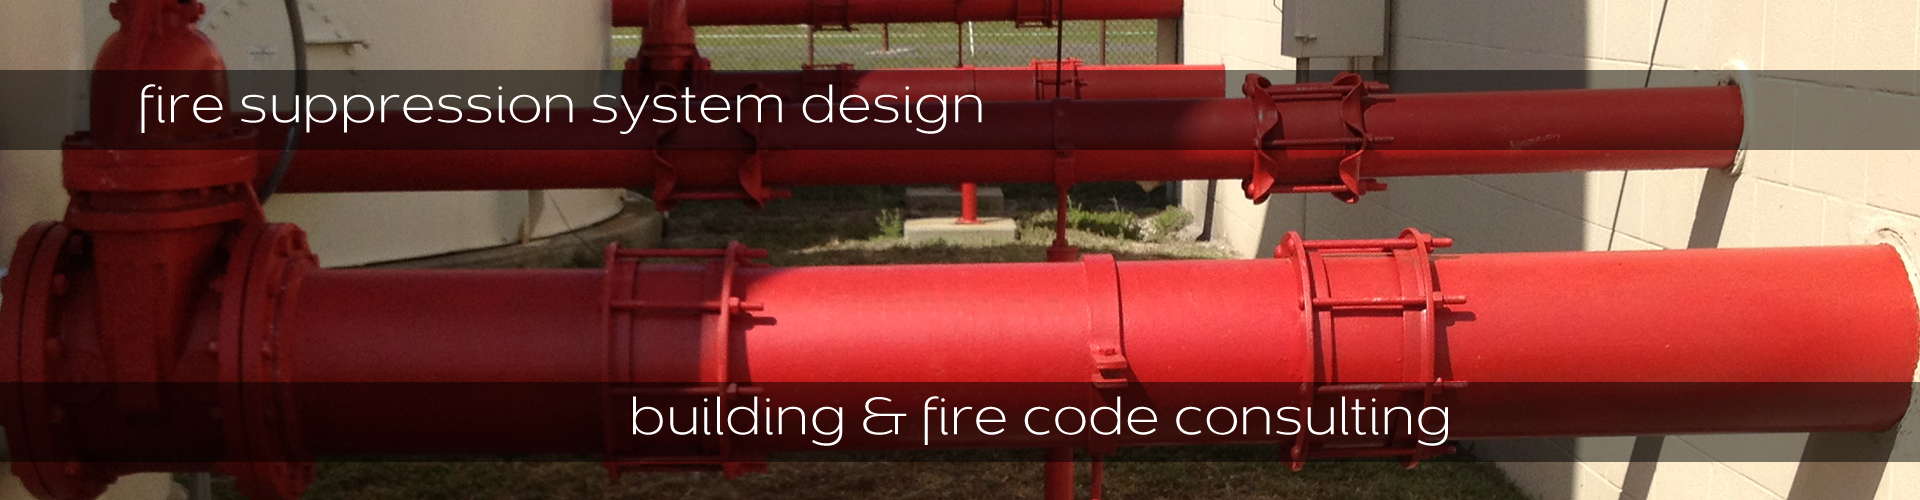 Hatcher Engineering - 813.752.6900 - fire protection engineering, design, & consulting